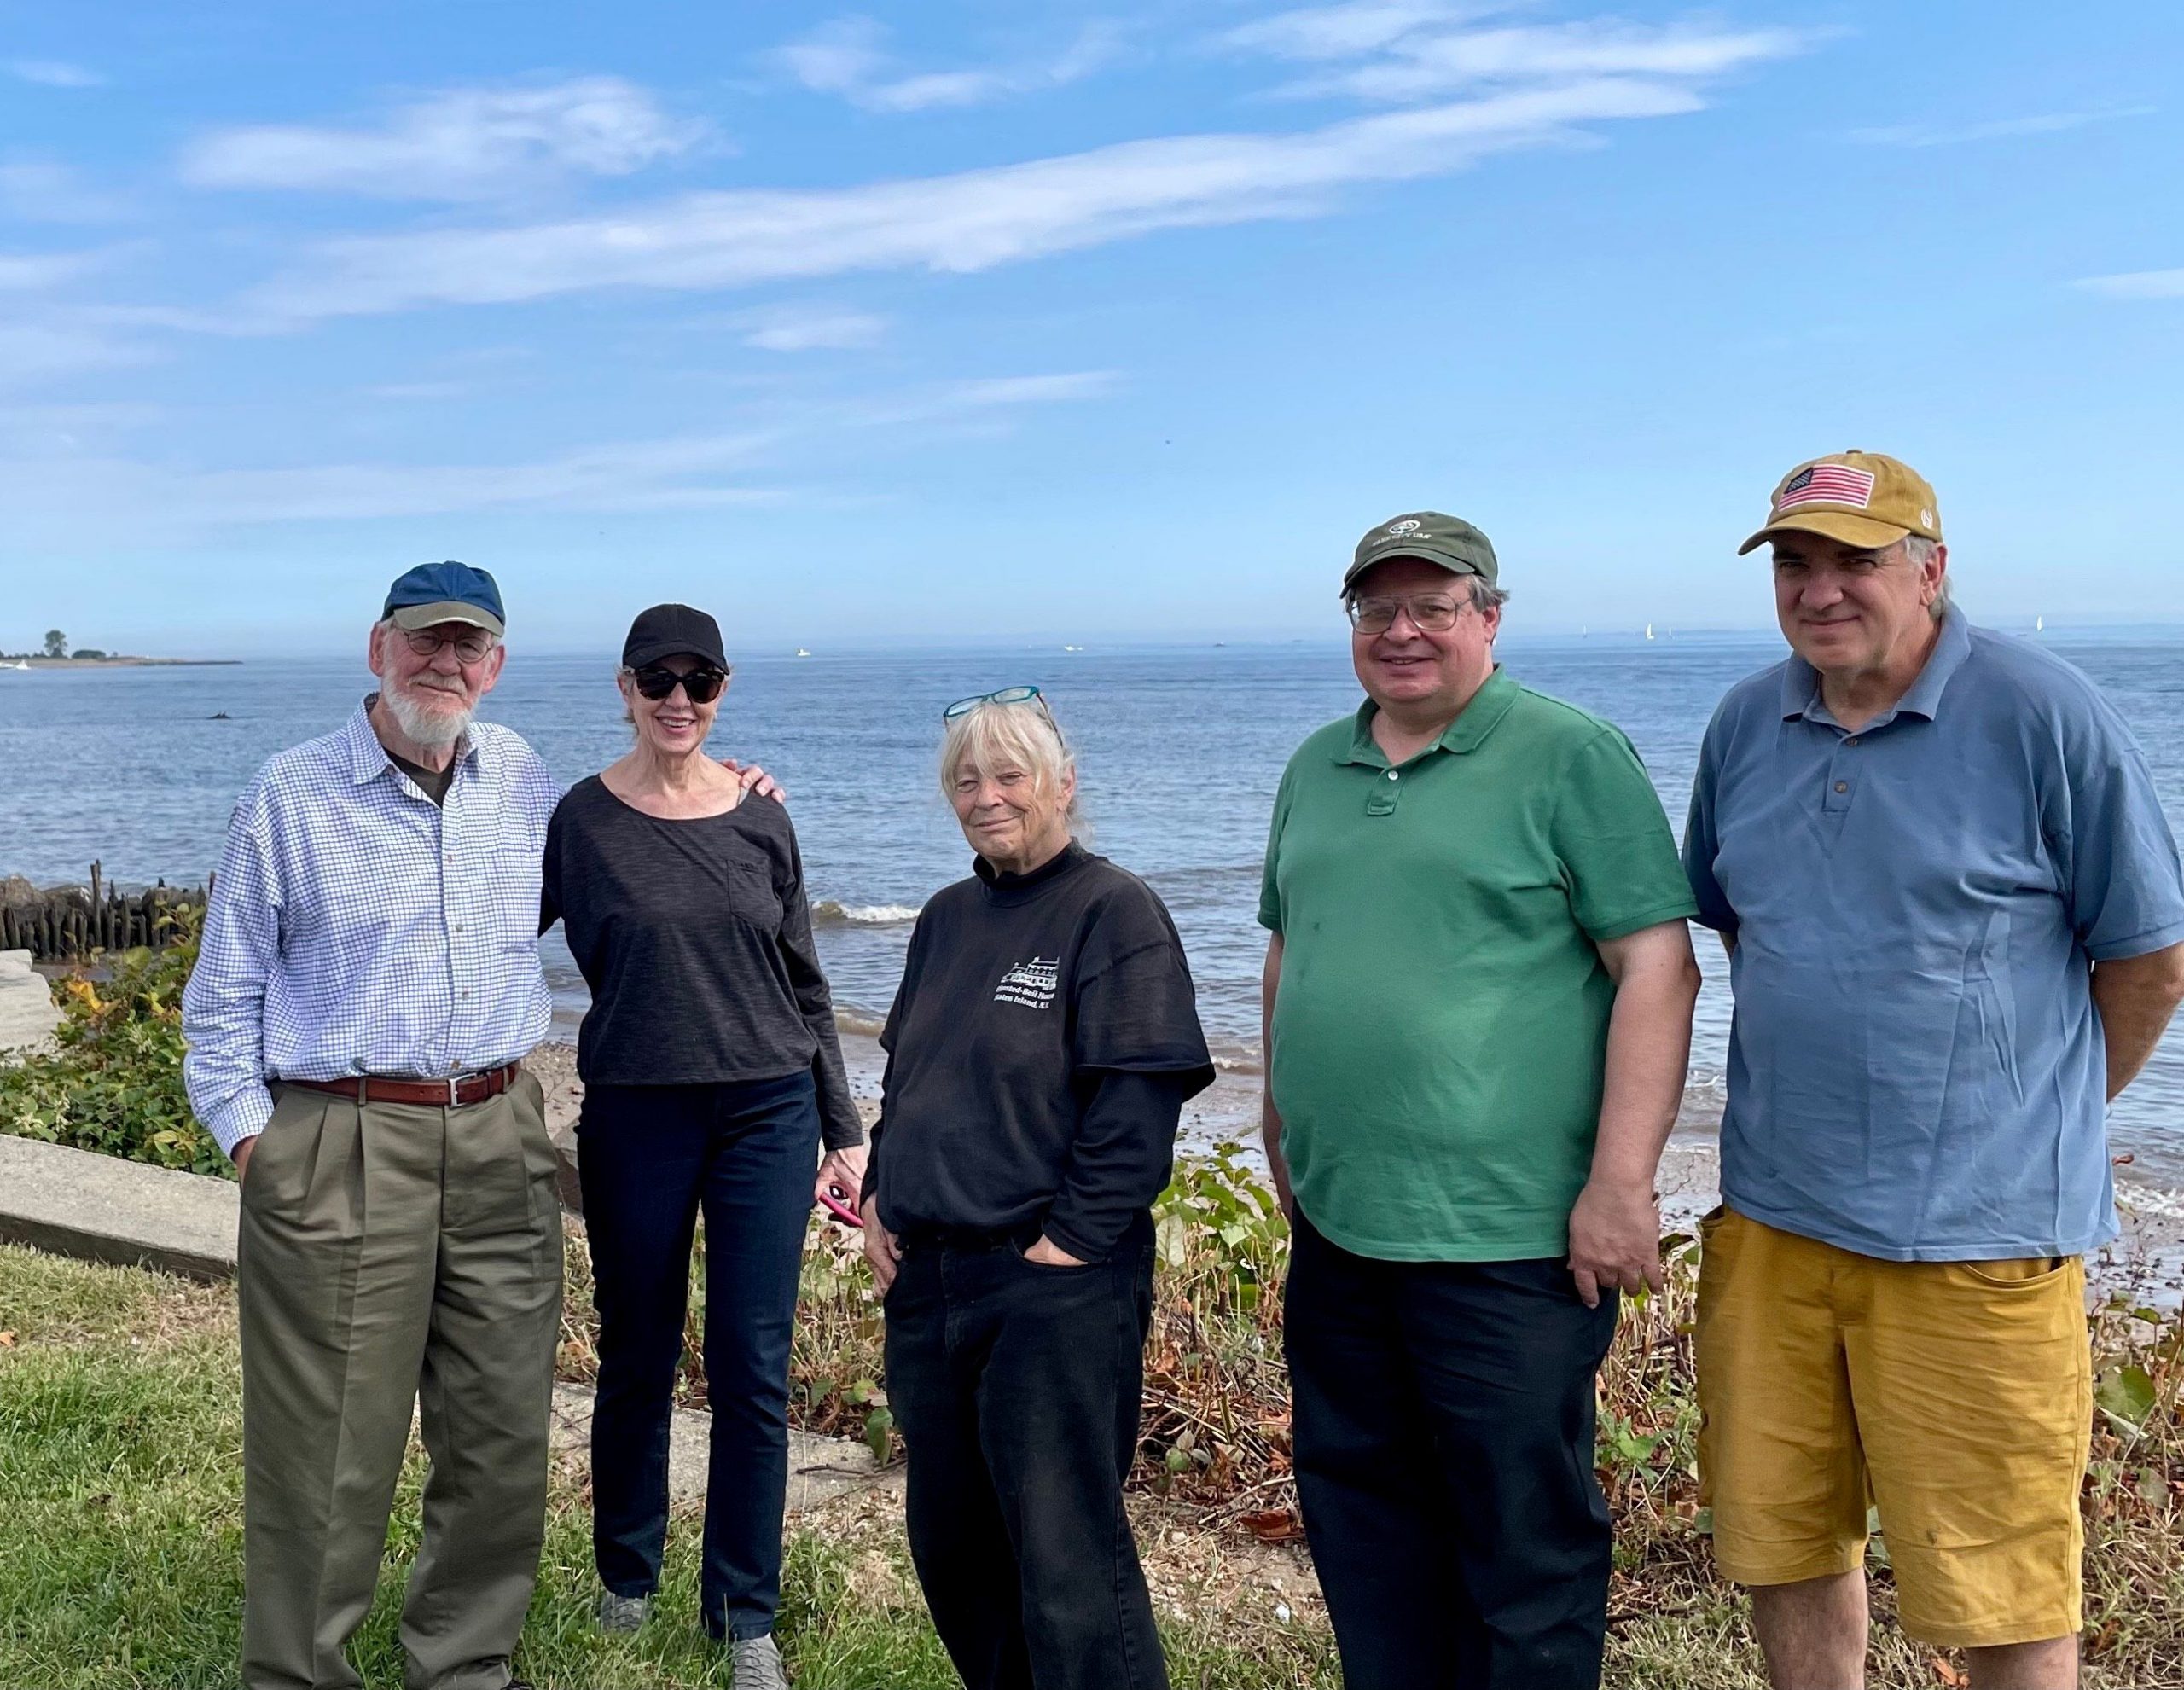 Dr. Beveridge and Faye Harwell with FOBH Board members on Eltingville Beach 10-03-2021